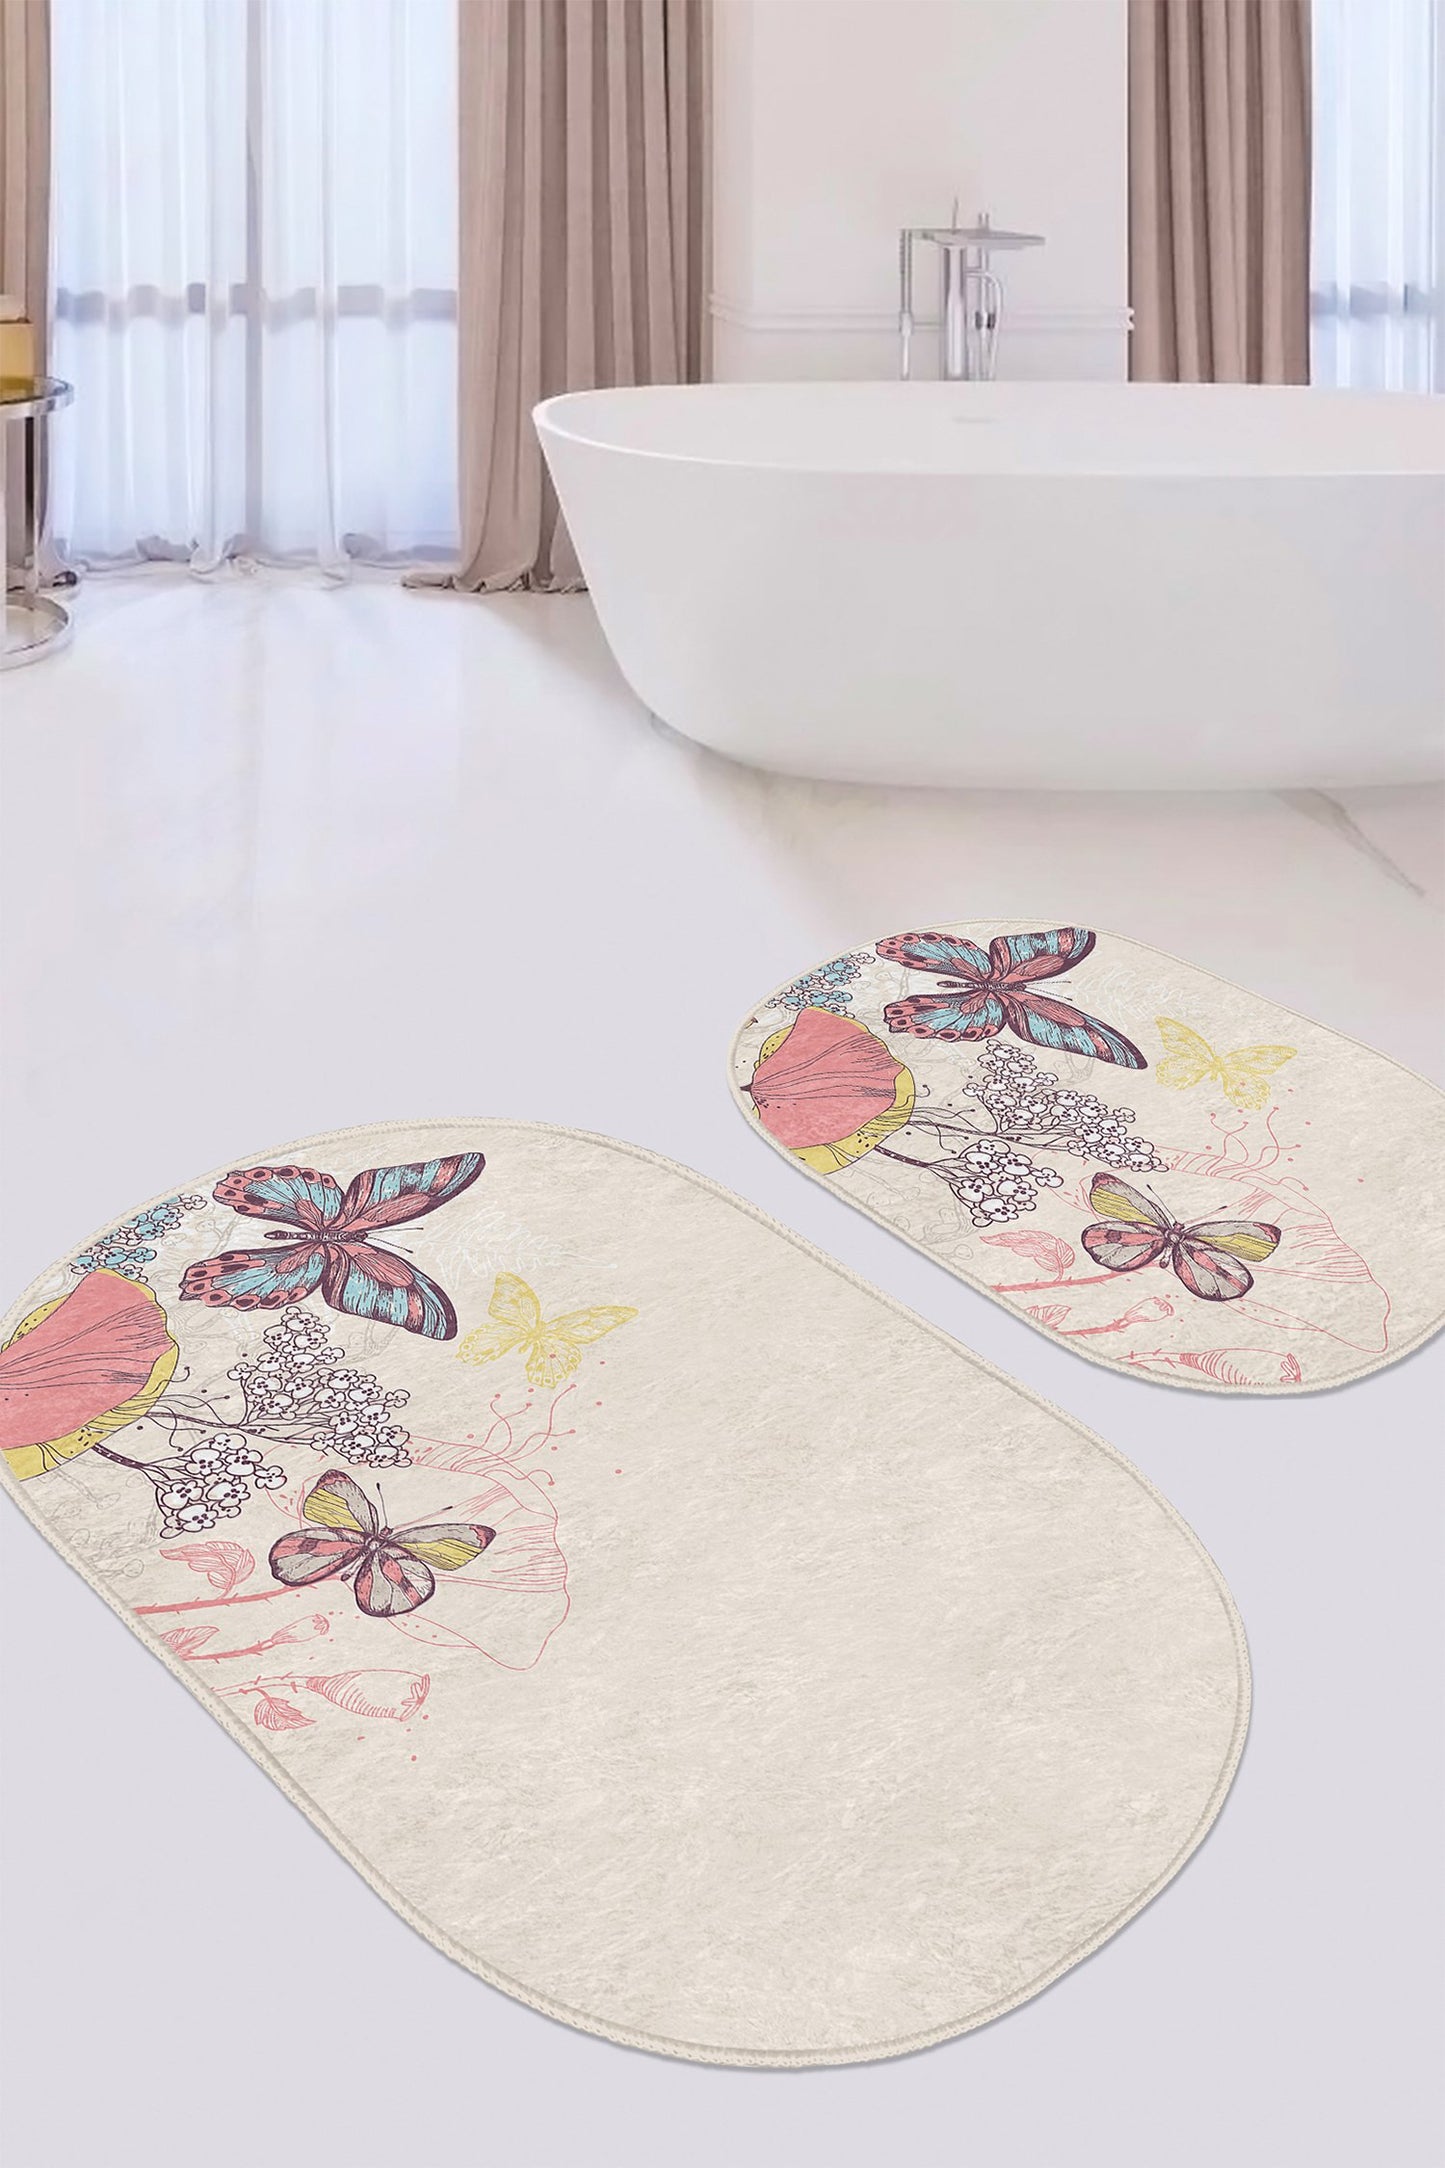 Decorative Bath Mat Set with a Charming Array of Oval Butterfly Patterns